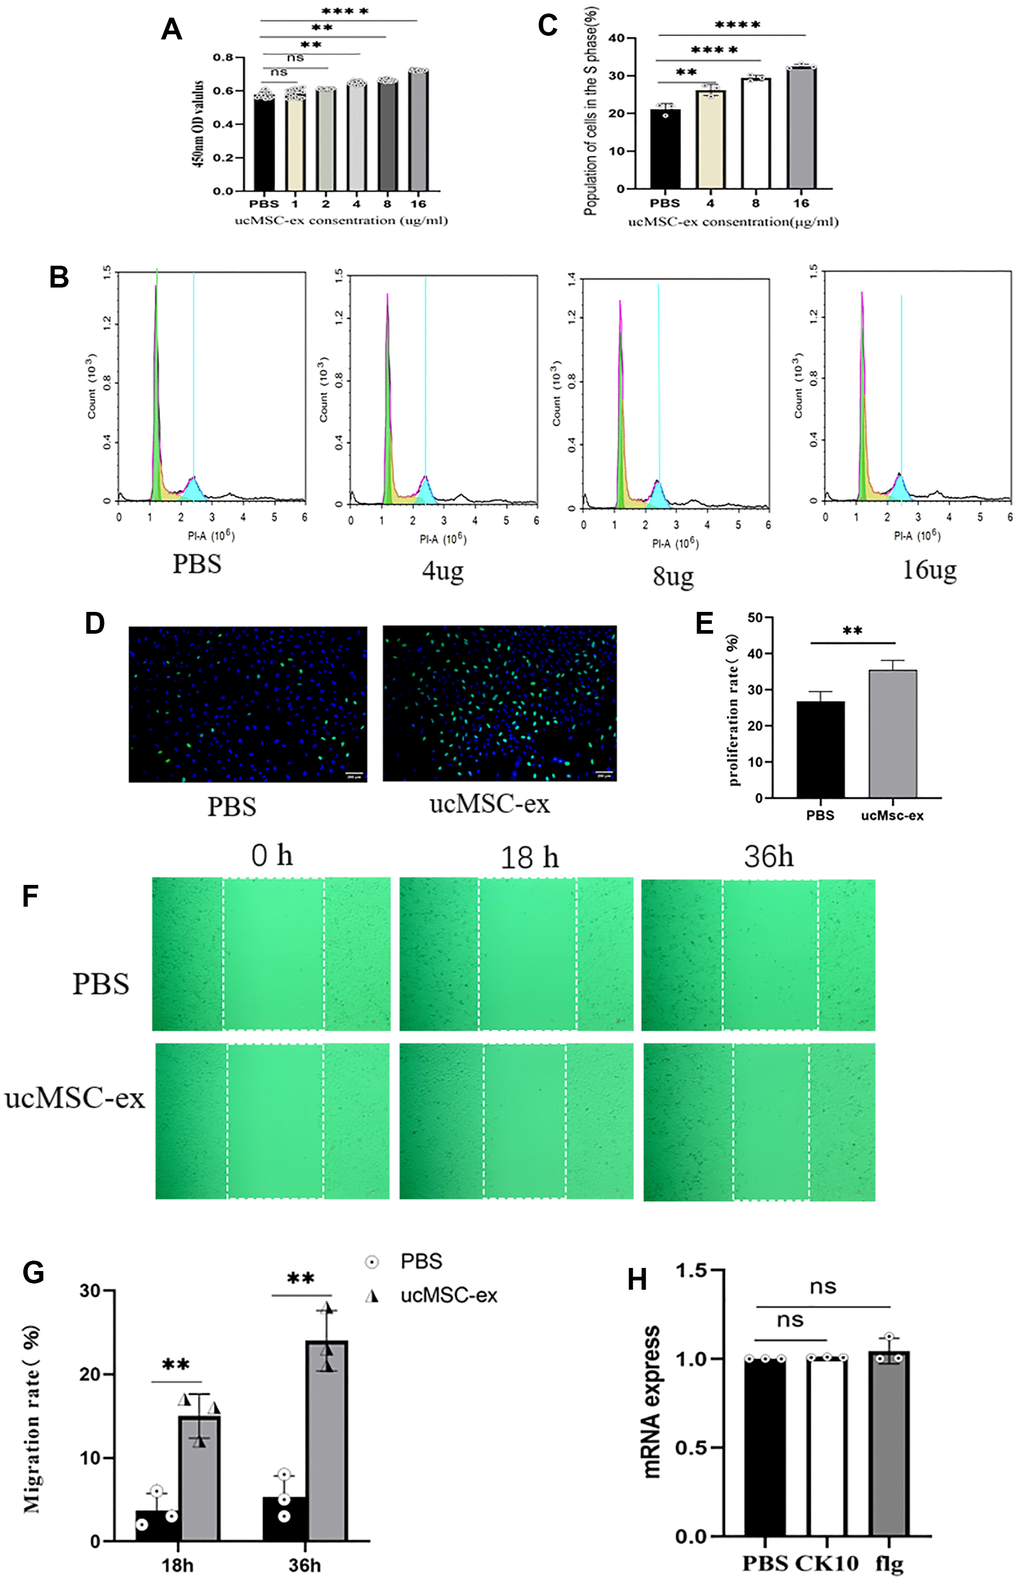 The effects of ucMSC-Ex on VK2 cell proliferation, migration, and differentiation. (A) CCK-8 assay measuring VK2 cell viability at different concentrations; (B) Flow cytometry analysis of cell cycle after co-culture for 18 hours; (C) Quantification of S-phase cell proportion; (D) EdU assay detecting VK2 cell proliferation after 24 hours of co-culture; (E) Quantitative analysis of EdU-positive cells; (F) Scratch assay showing ucMSC-Ex promotion of VK2 cell migration; (G) Quantification of cell migration; (H) Normalized expression levels of differentiation-related genes in ucMSC-ex treated group compared to PBS group.